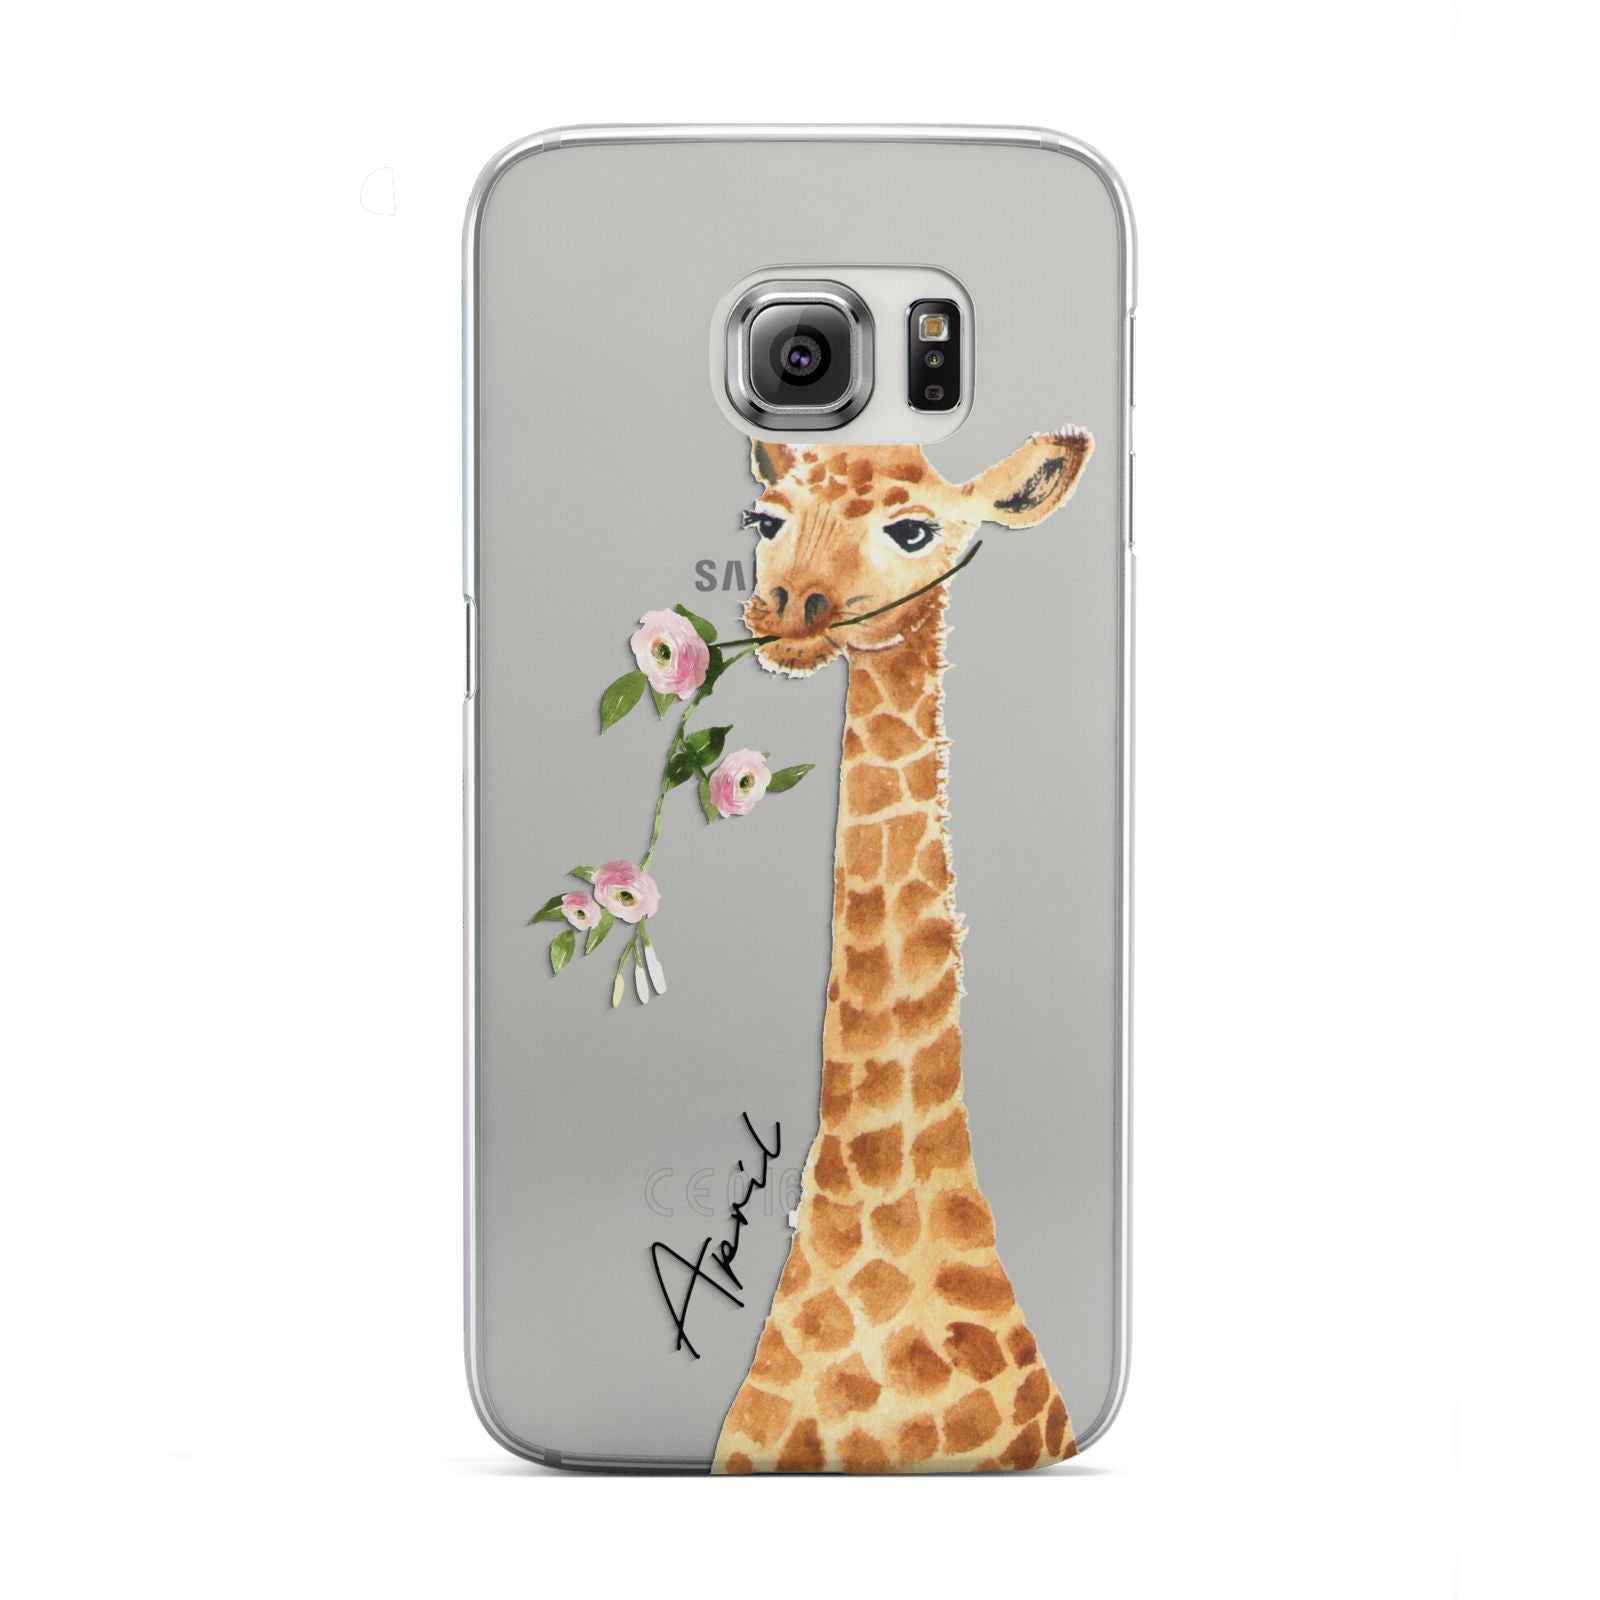 Personalised Giraffe with Name Samsung Galaxy S6 Edge Case